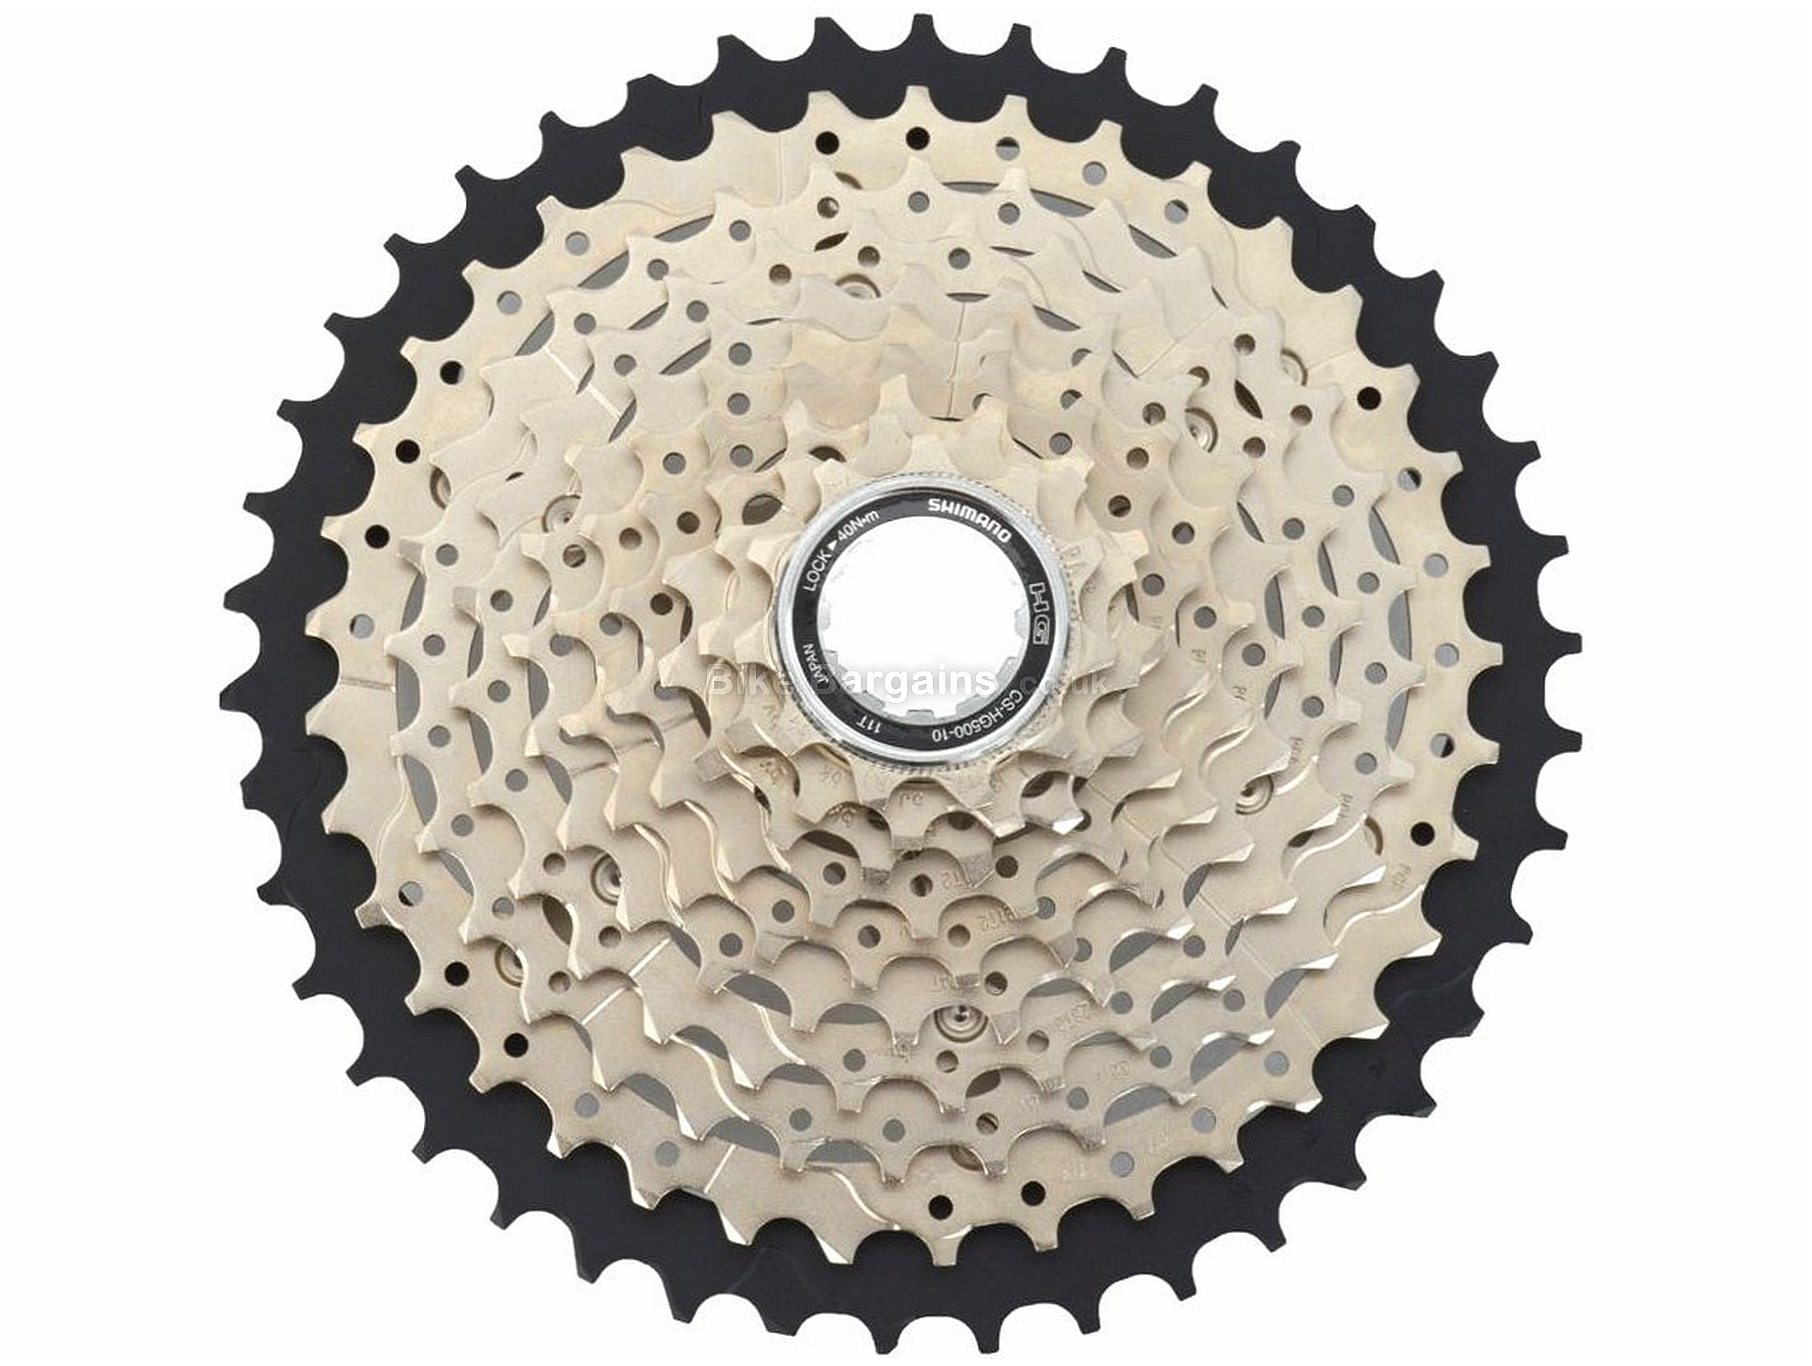 SHIMANO CS-HG500 HYPERGLIDE 10 SPEED---11-34T MTB BICYCLE CASSETTE